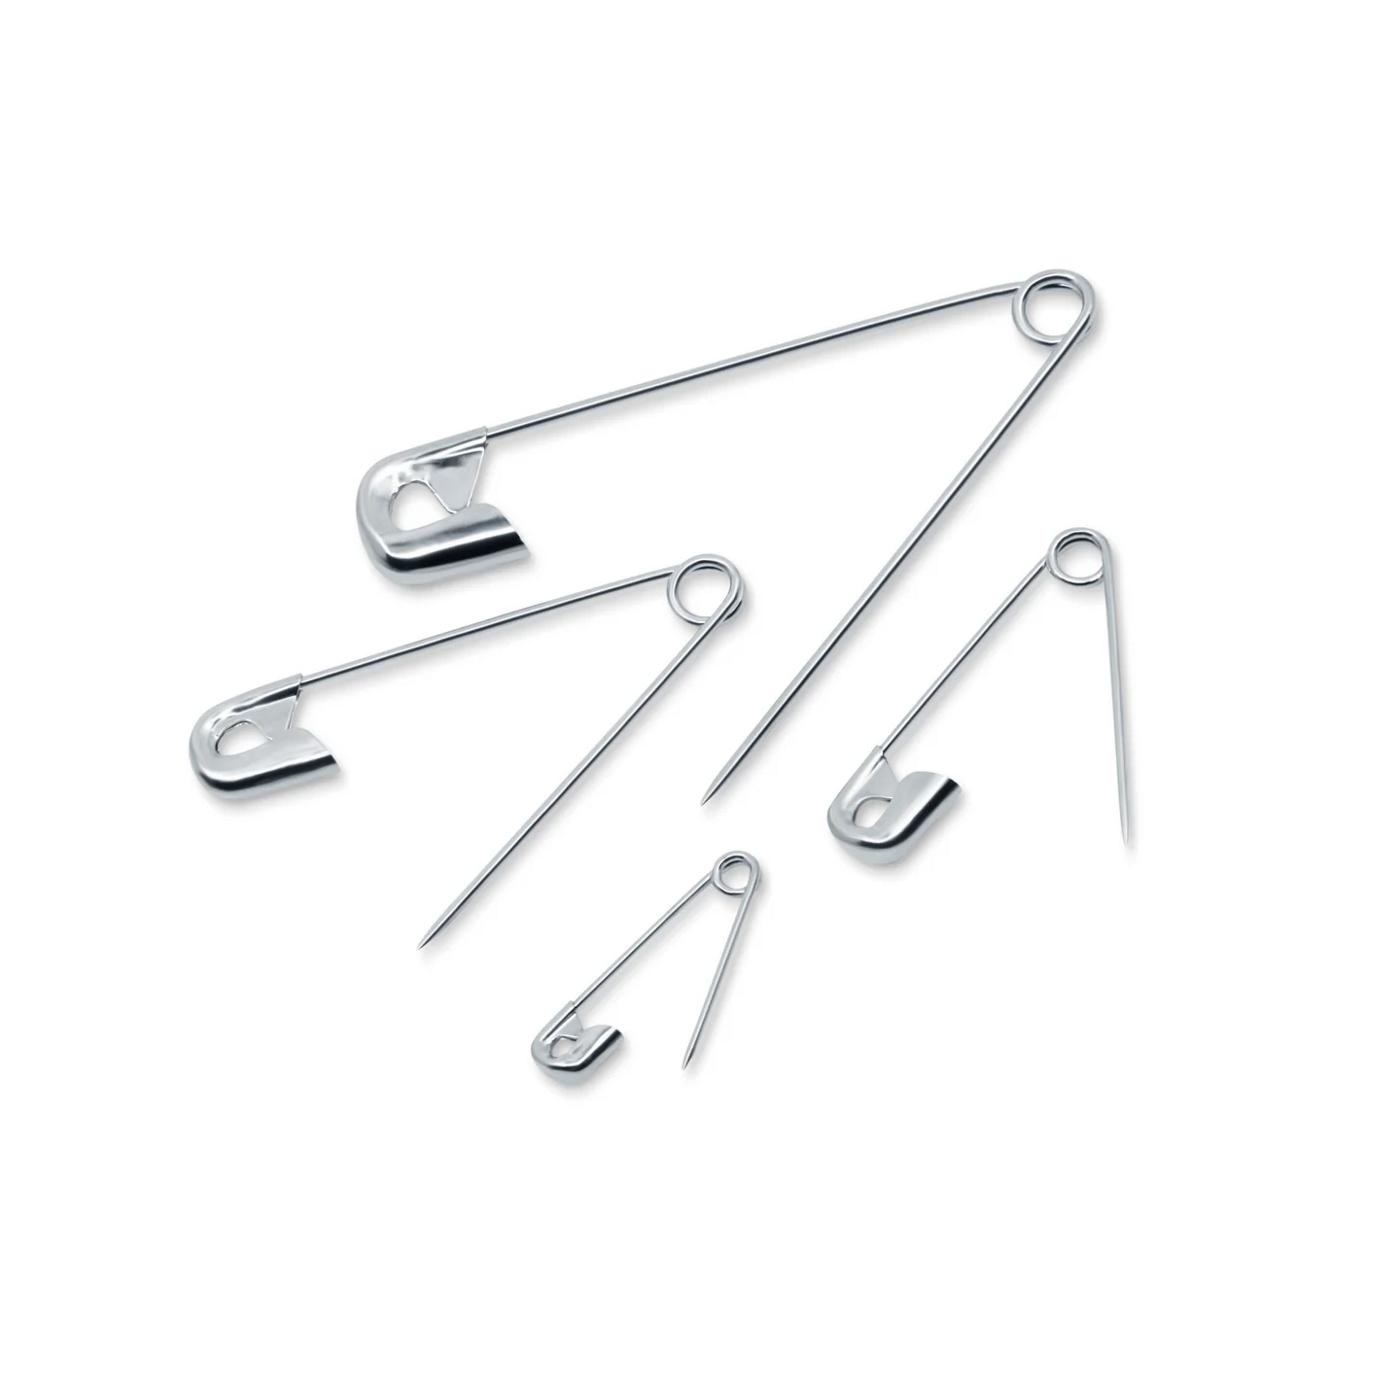 Dritz Assorted Safety Pins; image 2 of 4